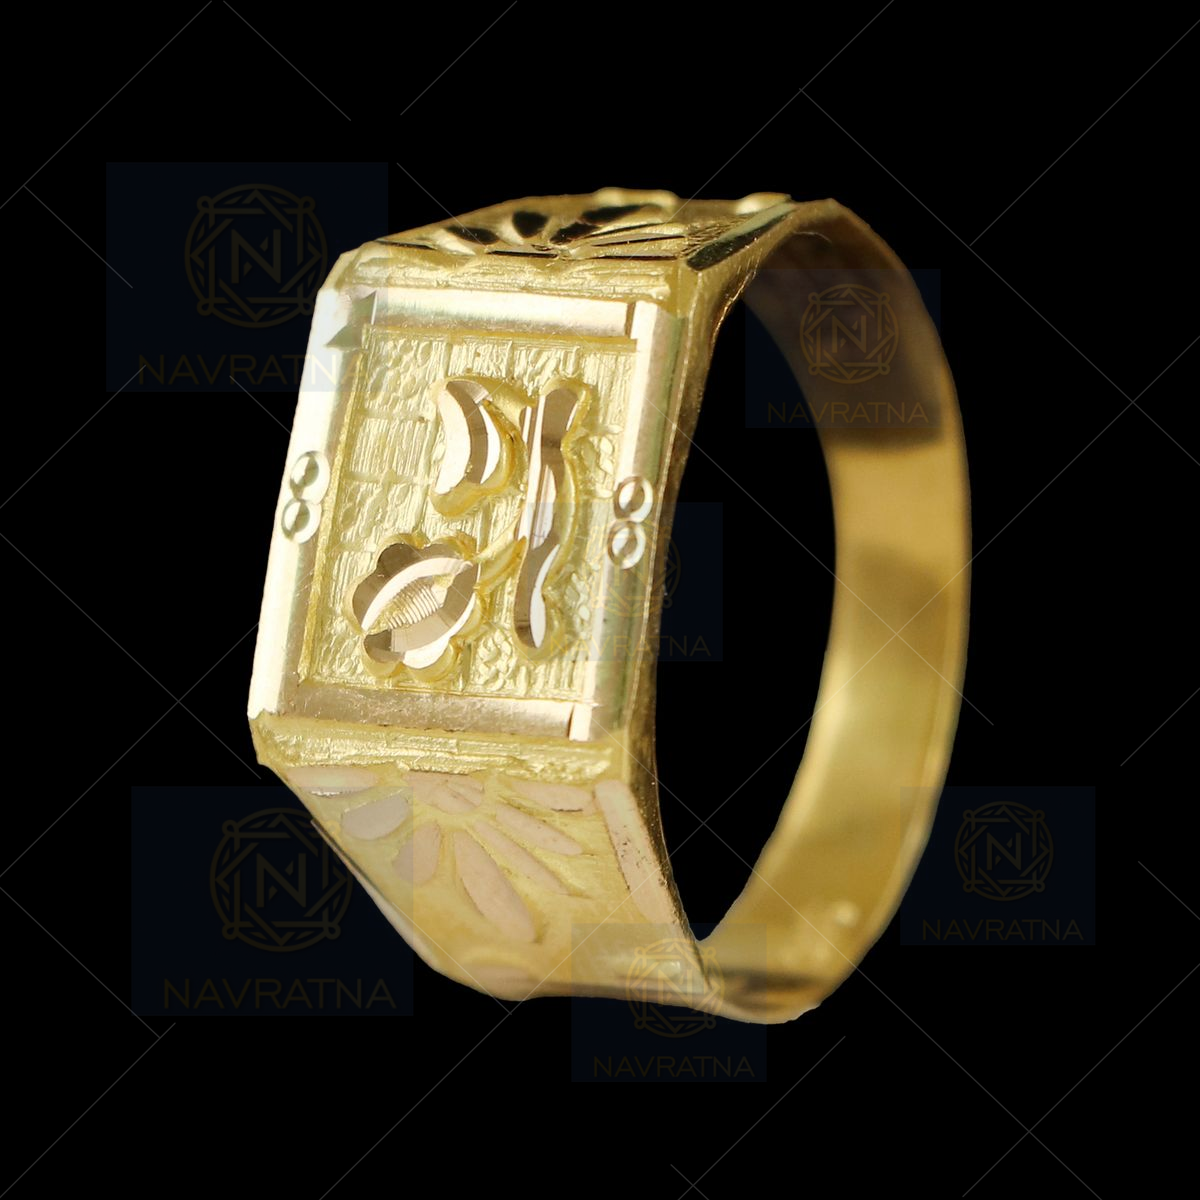 Maa to shree jewellers - The nazrana gold ring Wight=7 grm | Facebook